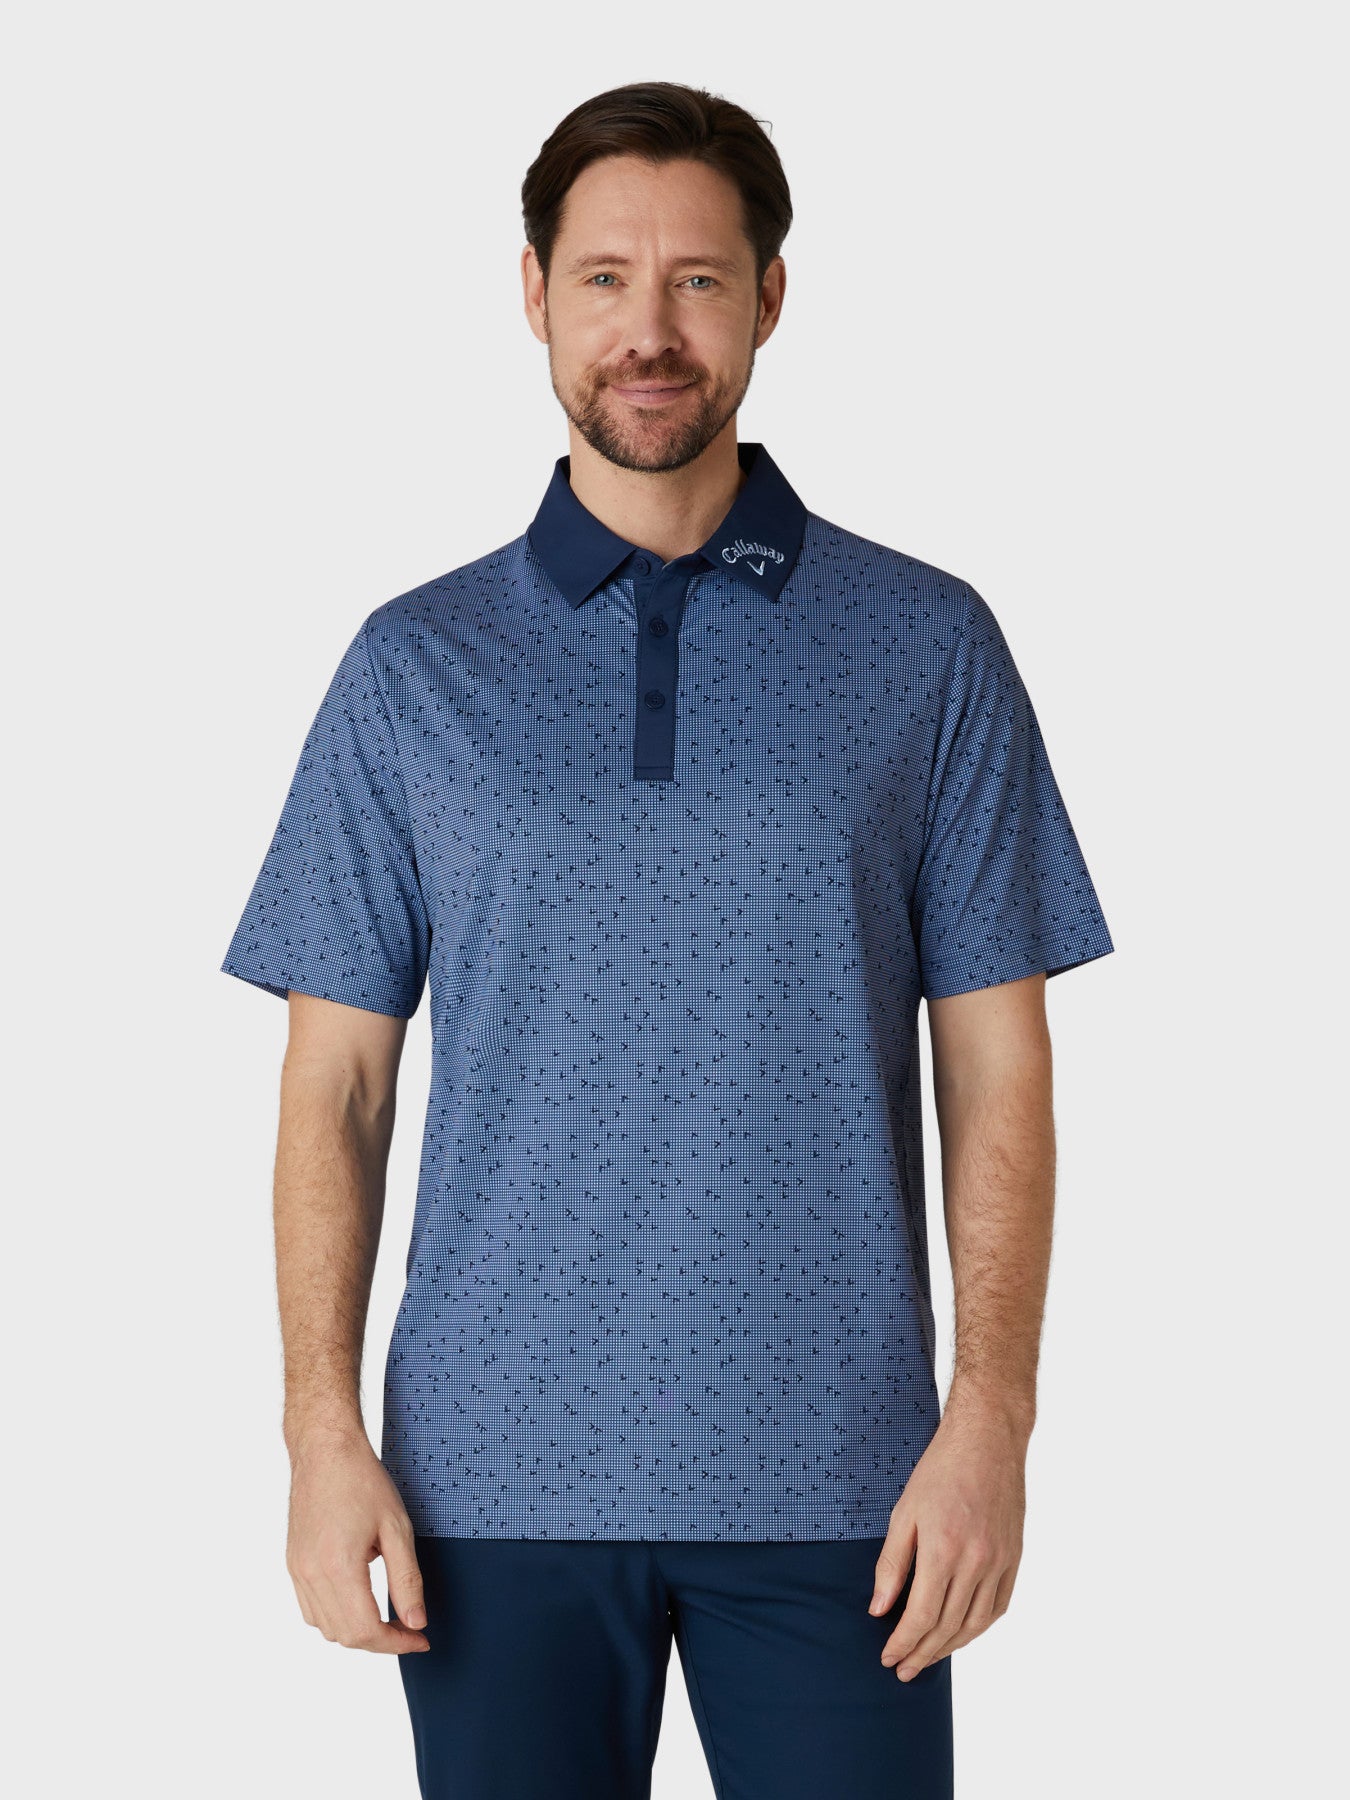 View Short Sleeve Chev All Over Trademark Print Polo Shirt In Peacoat information